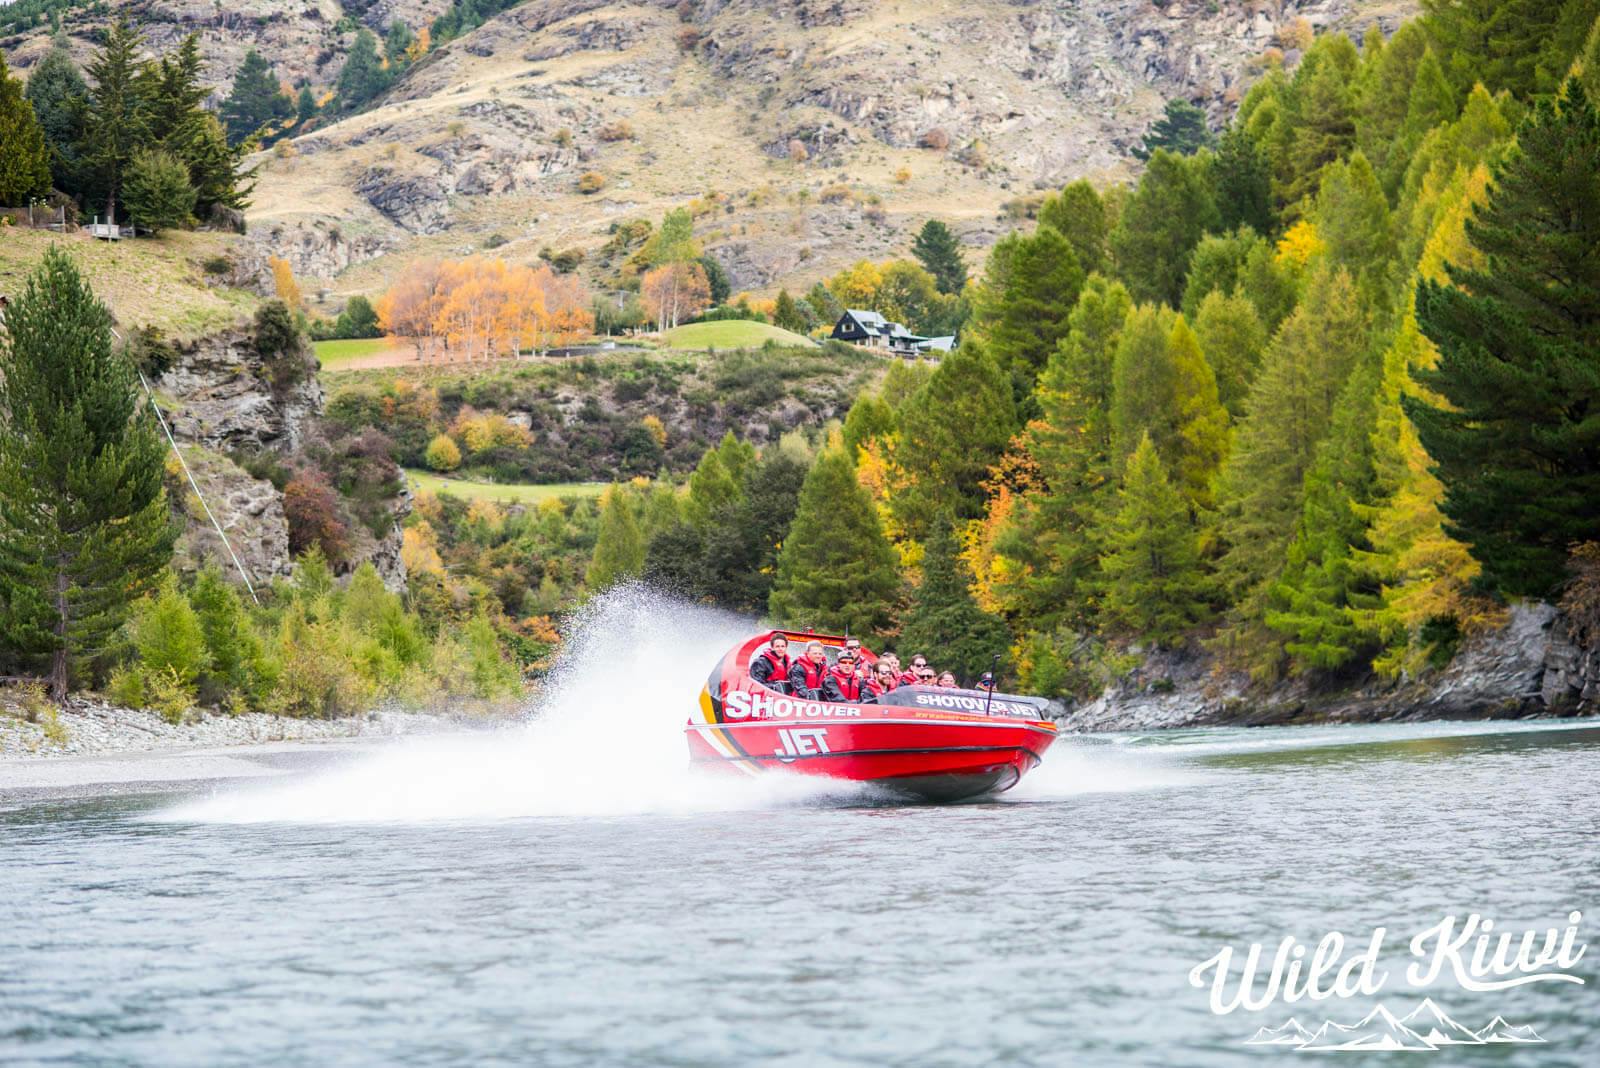 Excitement on the rivers of New Zealand - Hop in a jet boat and feel the power